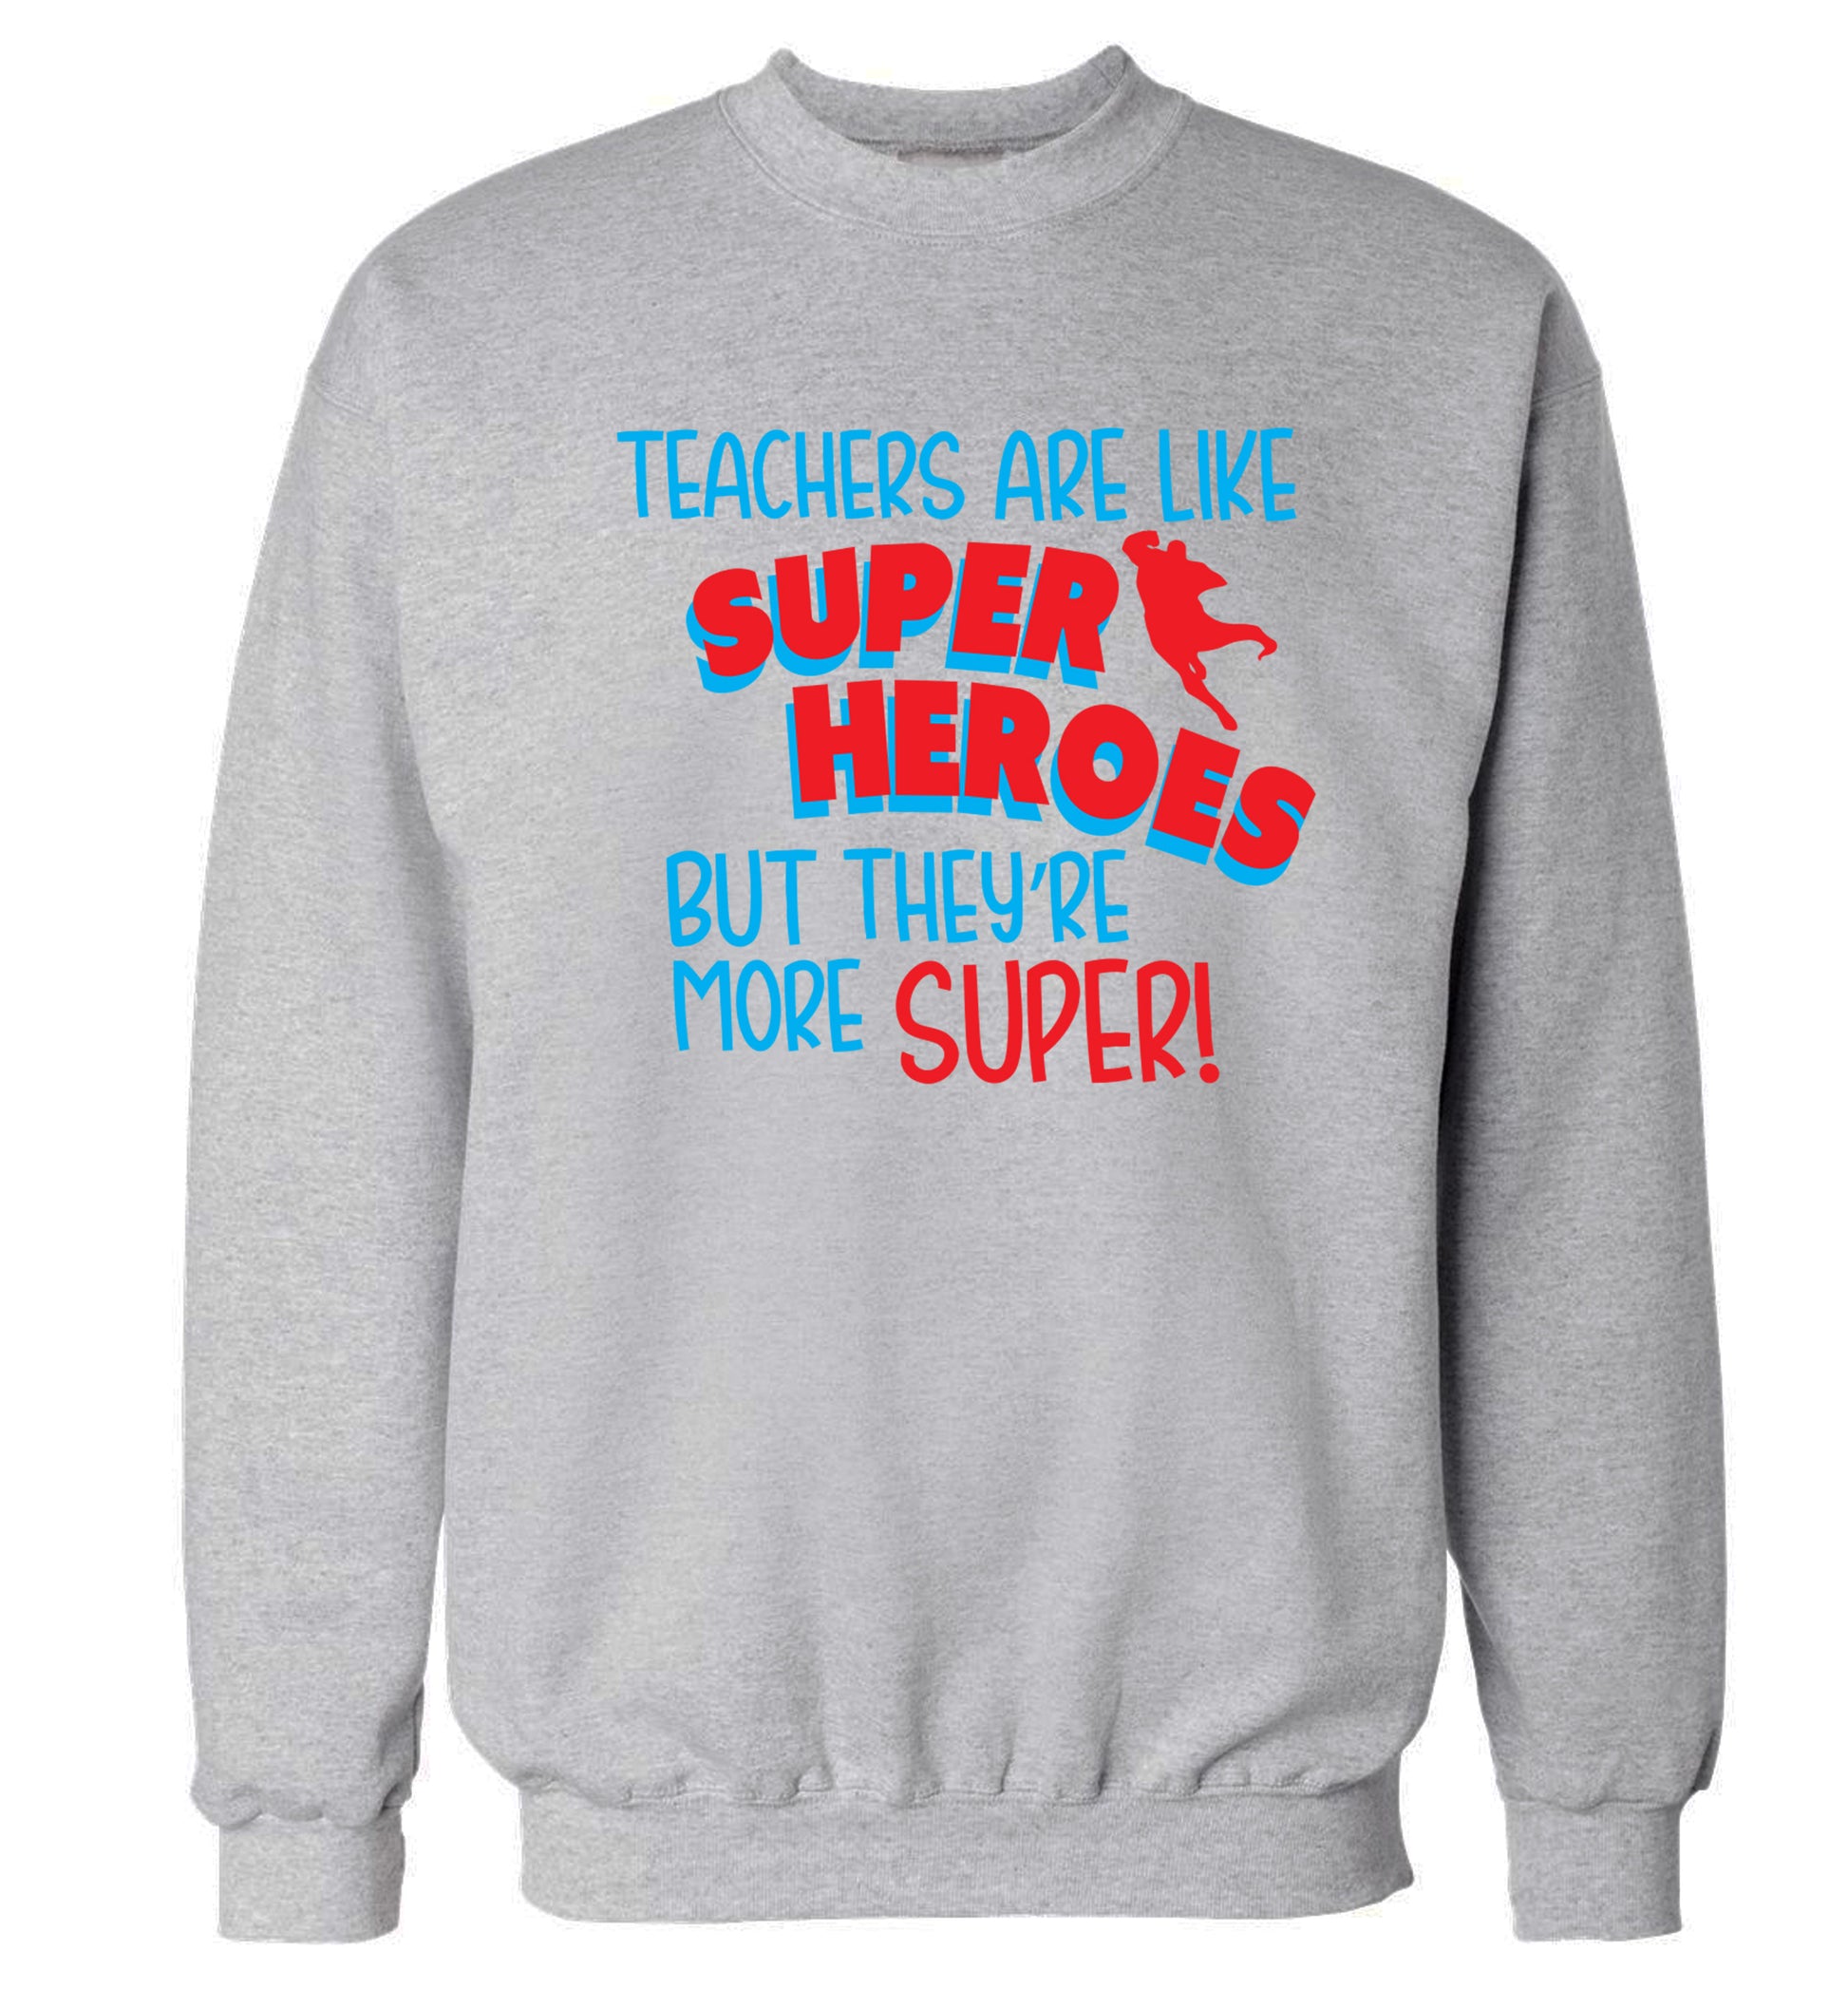 Teachers are like superheros but they're more super Adult's unisex grey Sweater 2XL